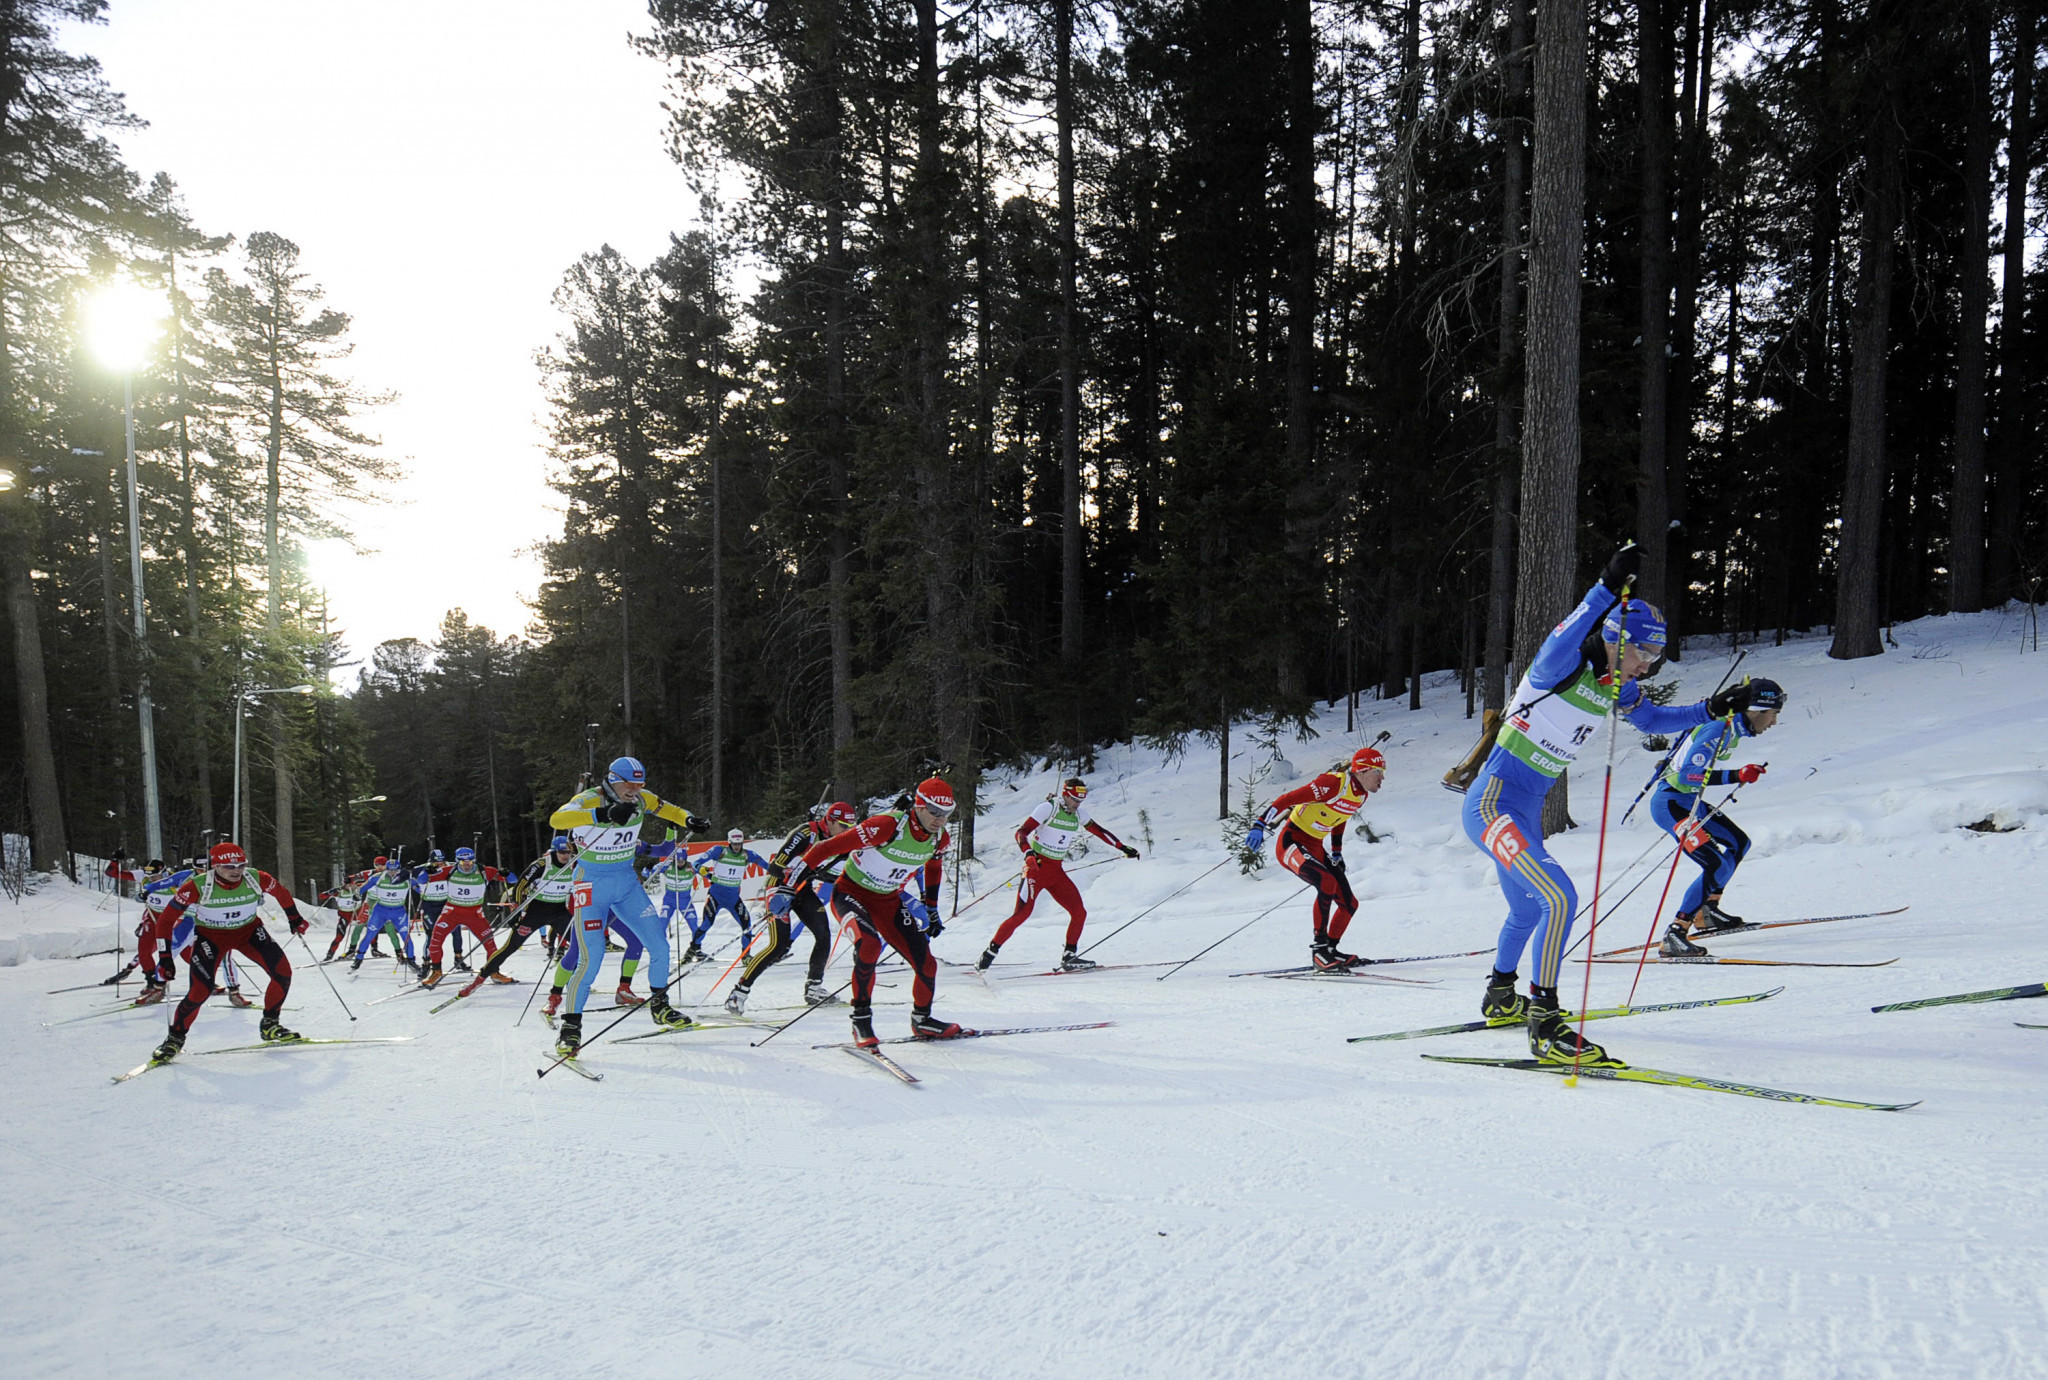 Khanty-Mansiysk has staged multiple International Biathlon Union World Cups in the past, with biathlon also on the proposed sporting programme for the upcoming event  ©Getty Images